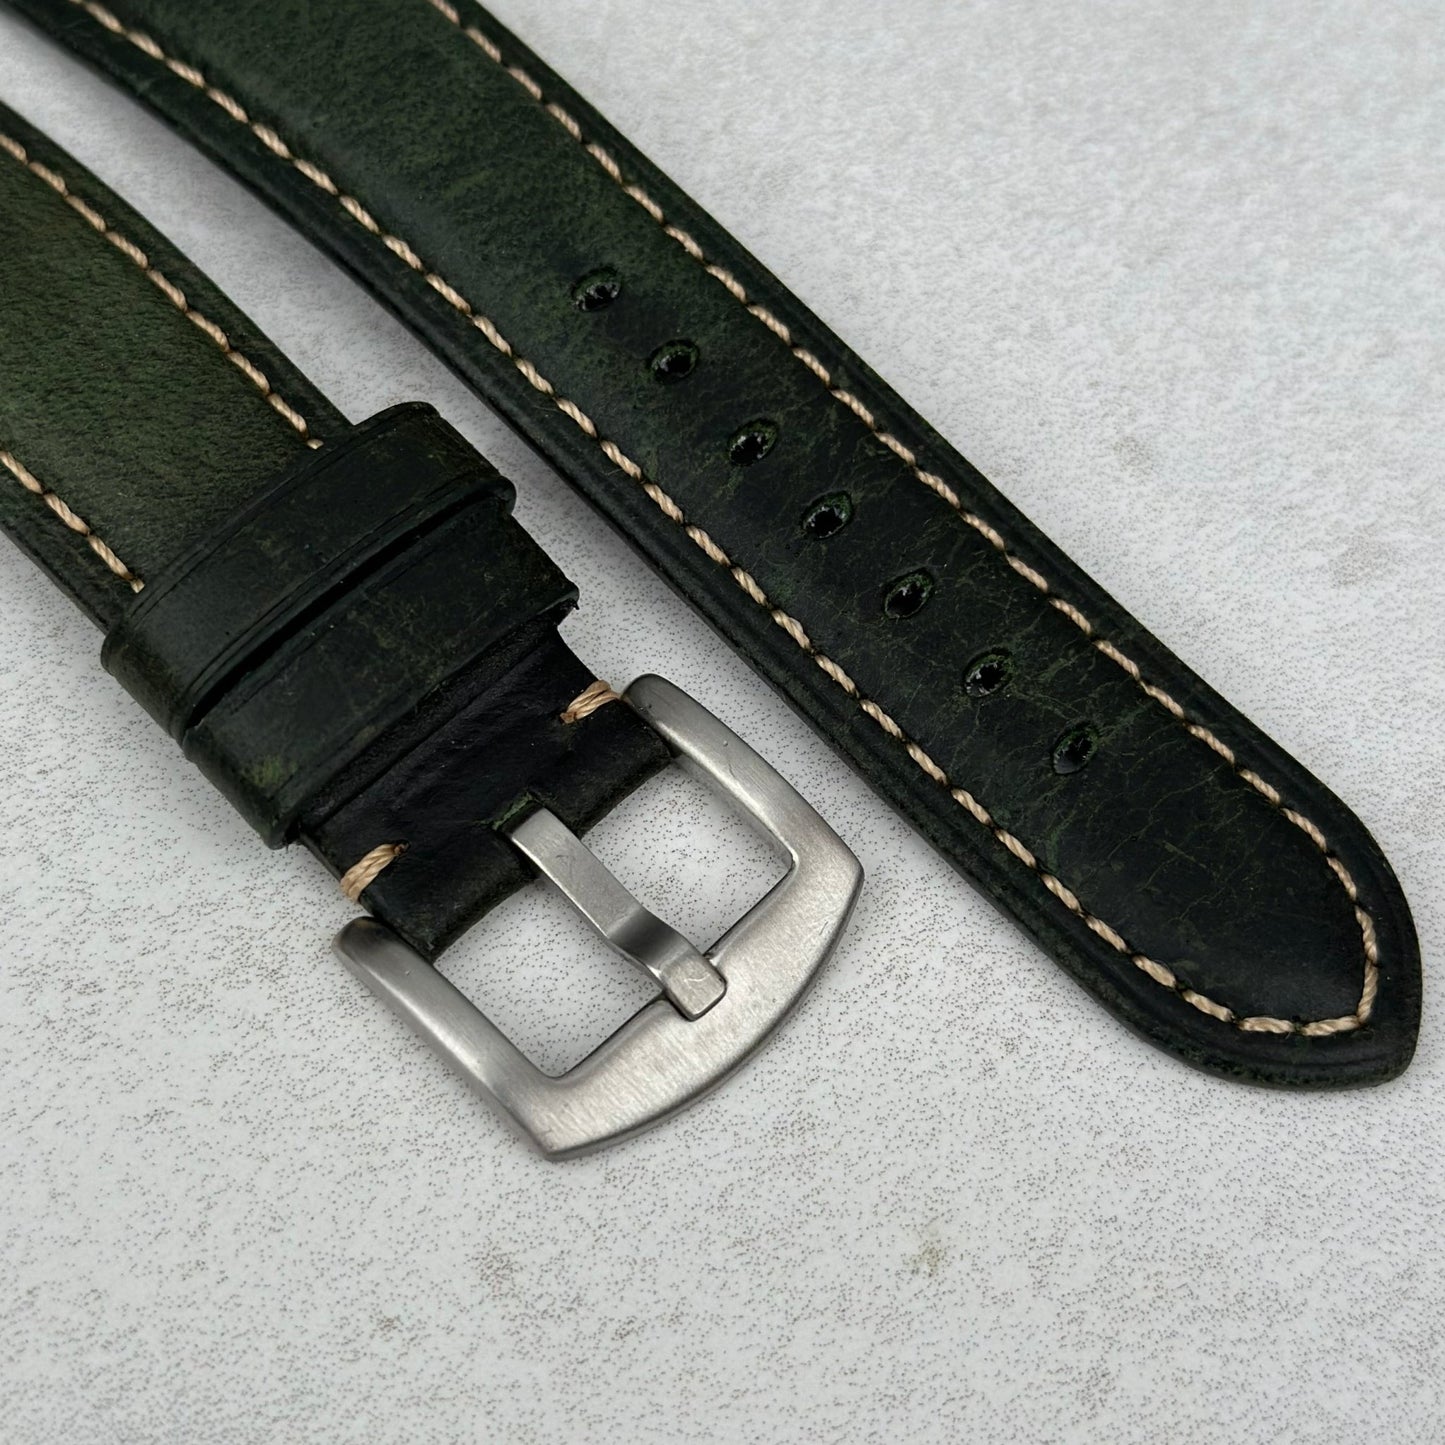 Brushed 316L stainless steel buckle on the Berlin green full grain leather watch strap. Watch And Strap.